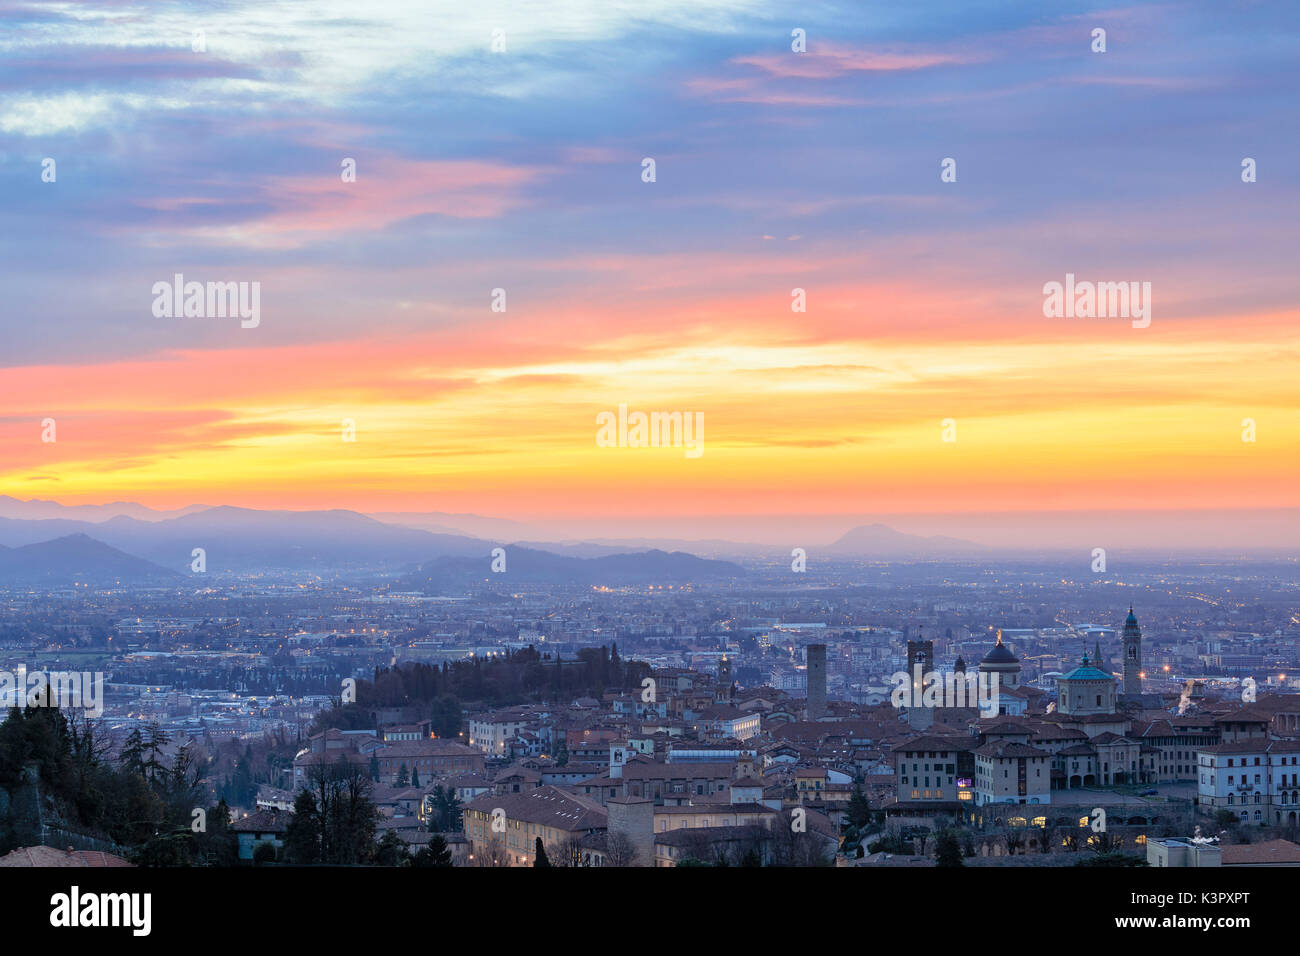 View of the medieval old town called Città Alta on hilltop framed by the fiery orange sky at dawn Bergamo Lombardy Italy Europe Stock Photo